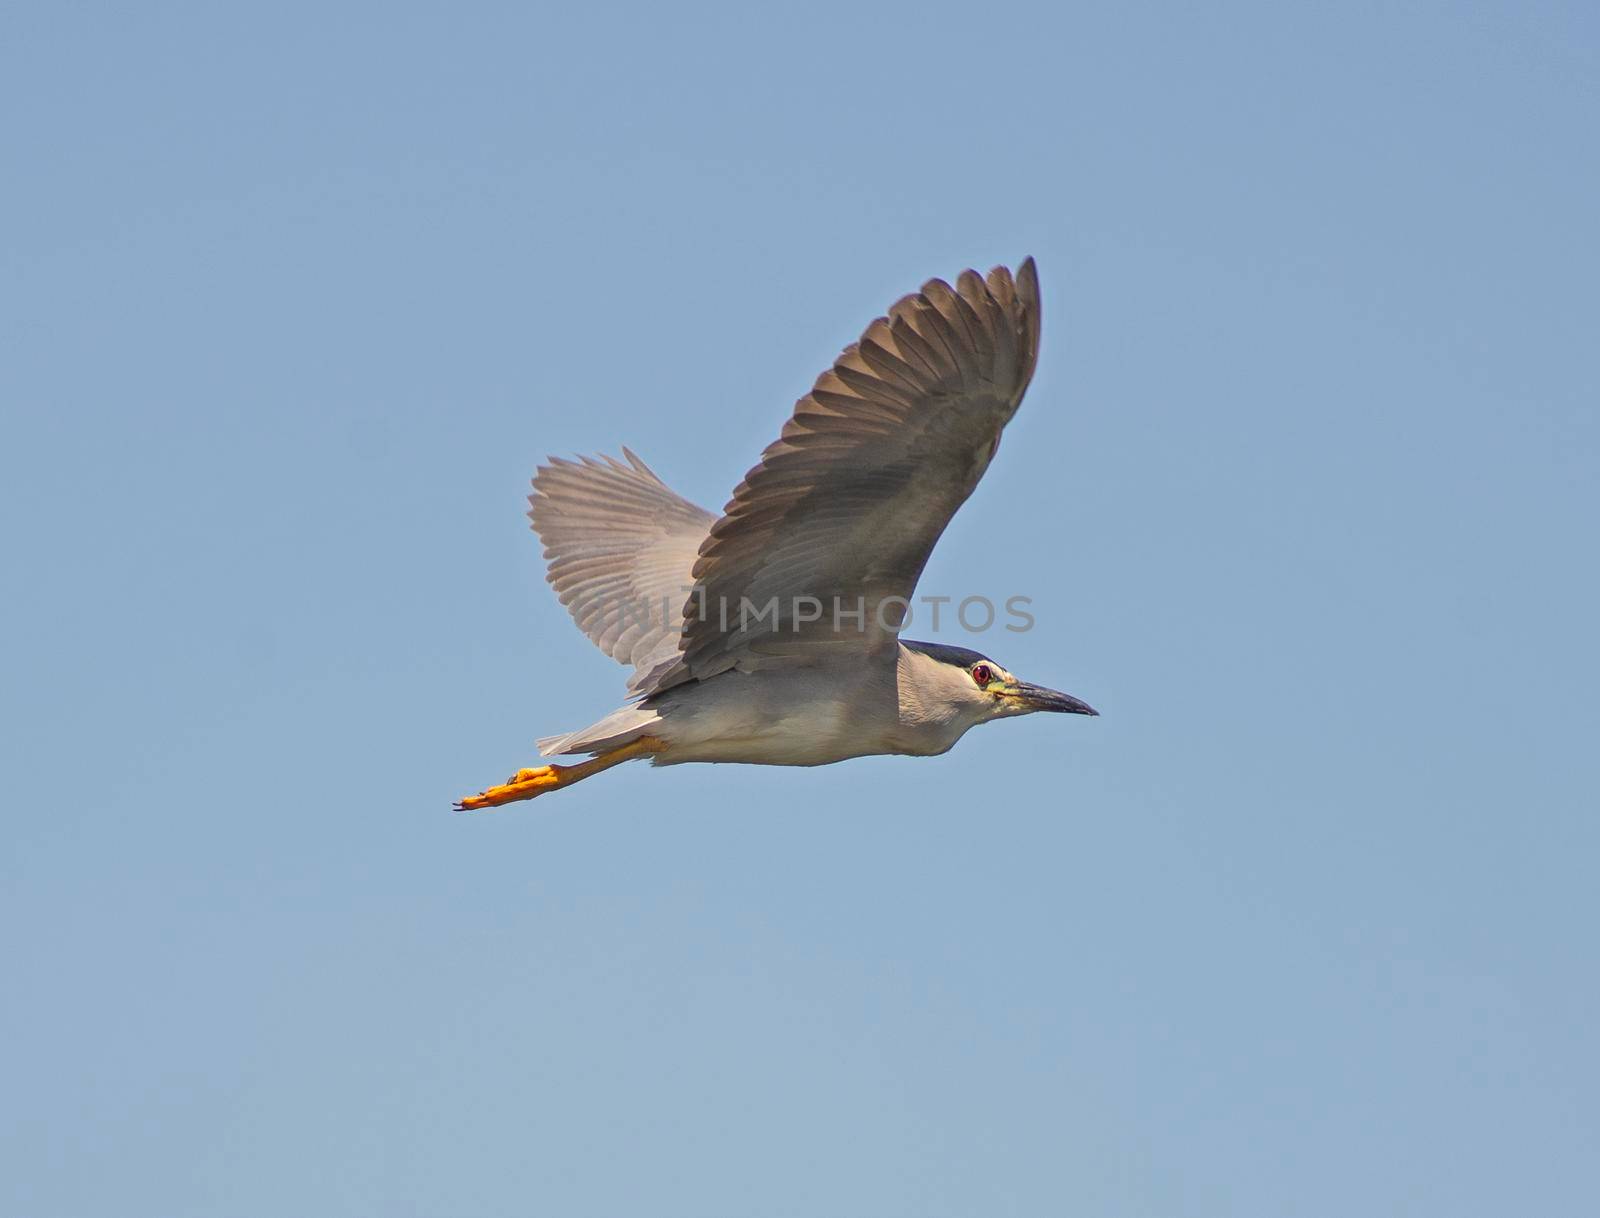 Black-crowned night heron nycticorax nycticorax in flight against blue sky background with minaret tower